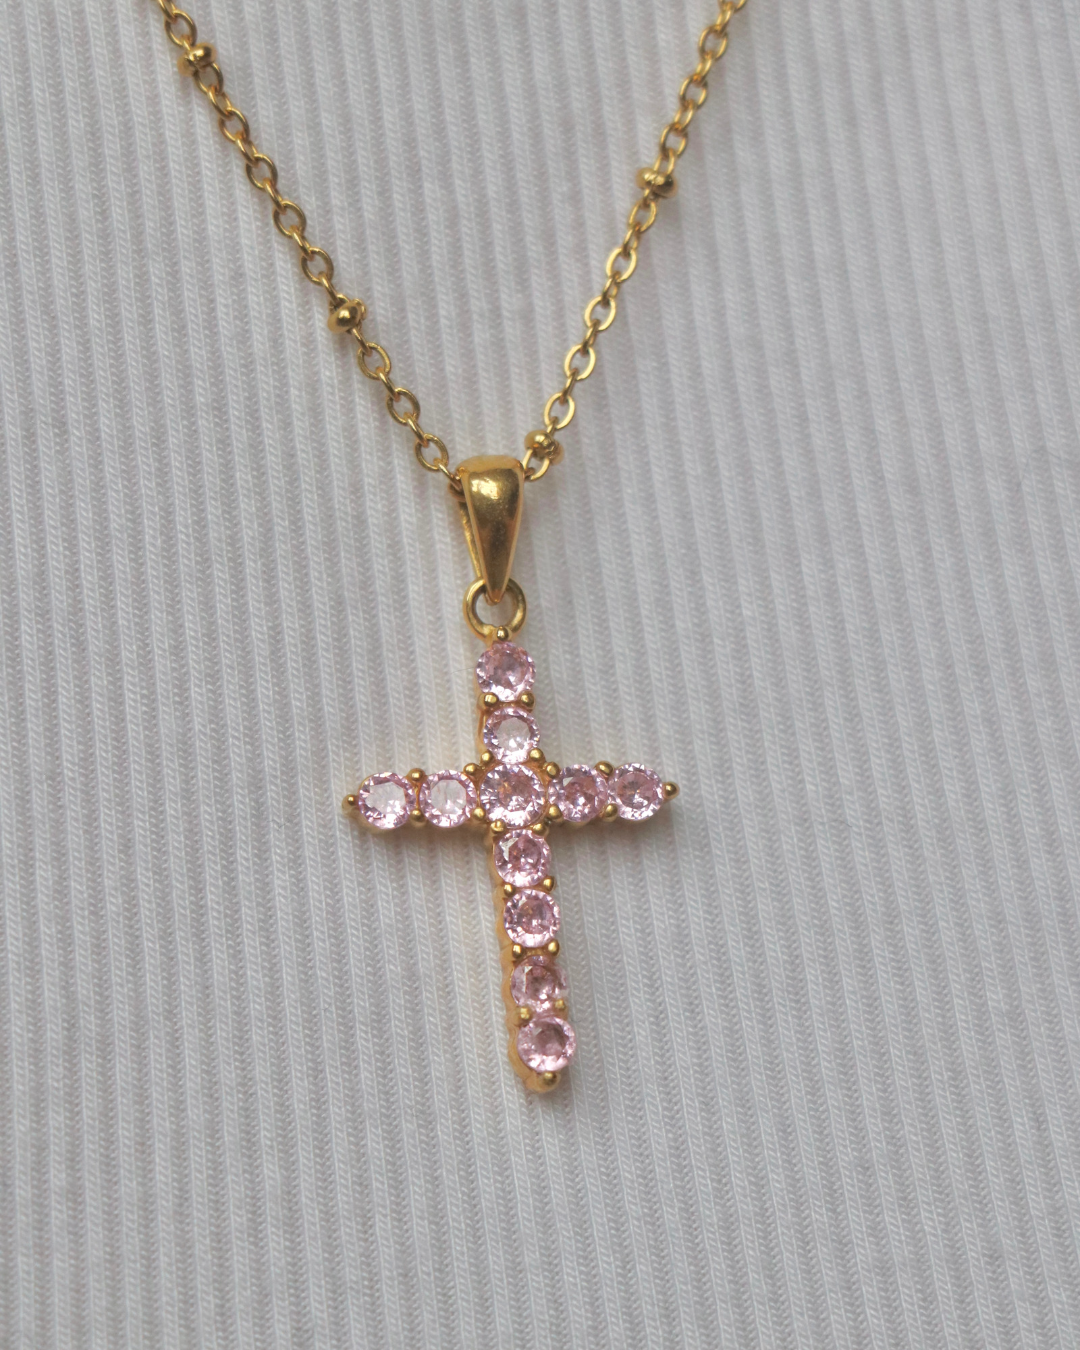 The Pink Cross Necklace